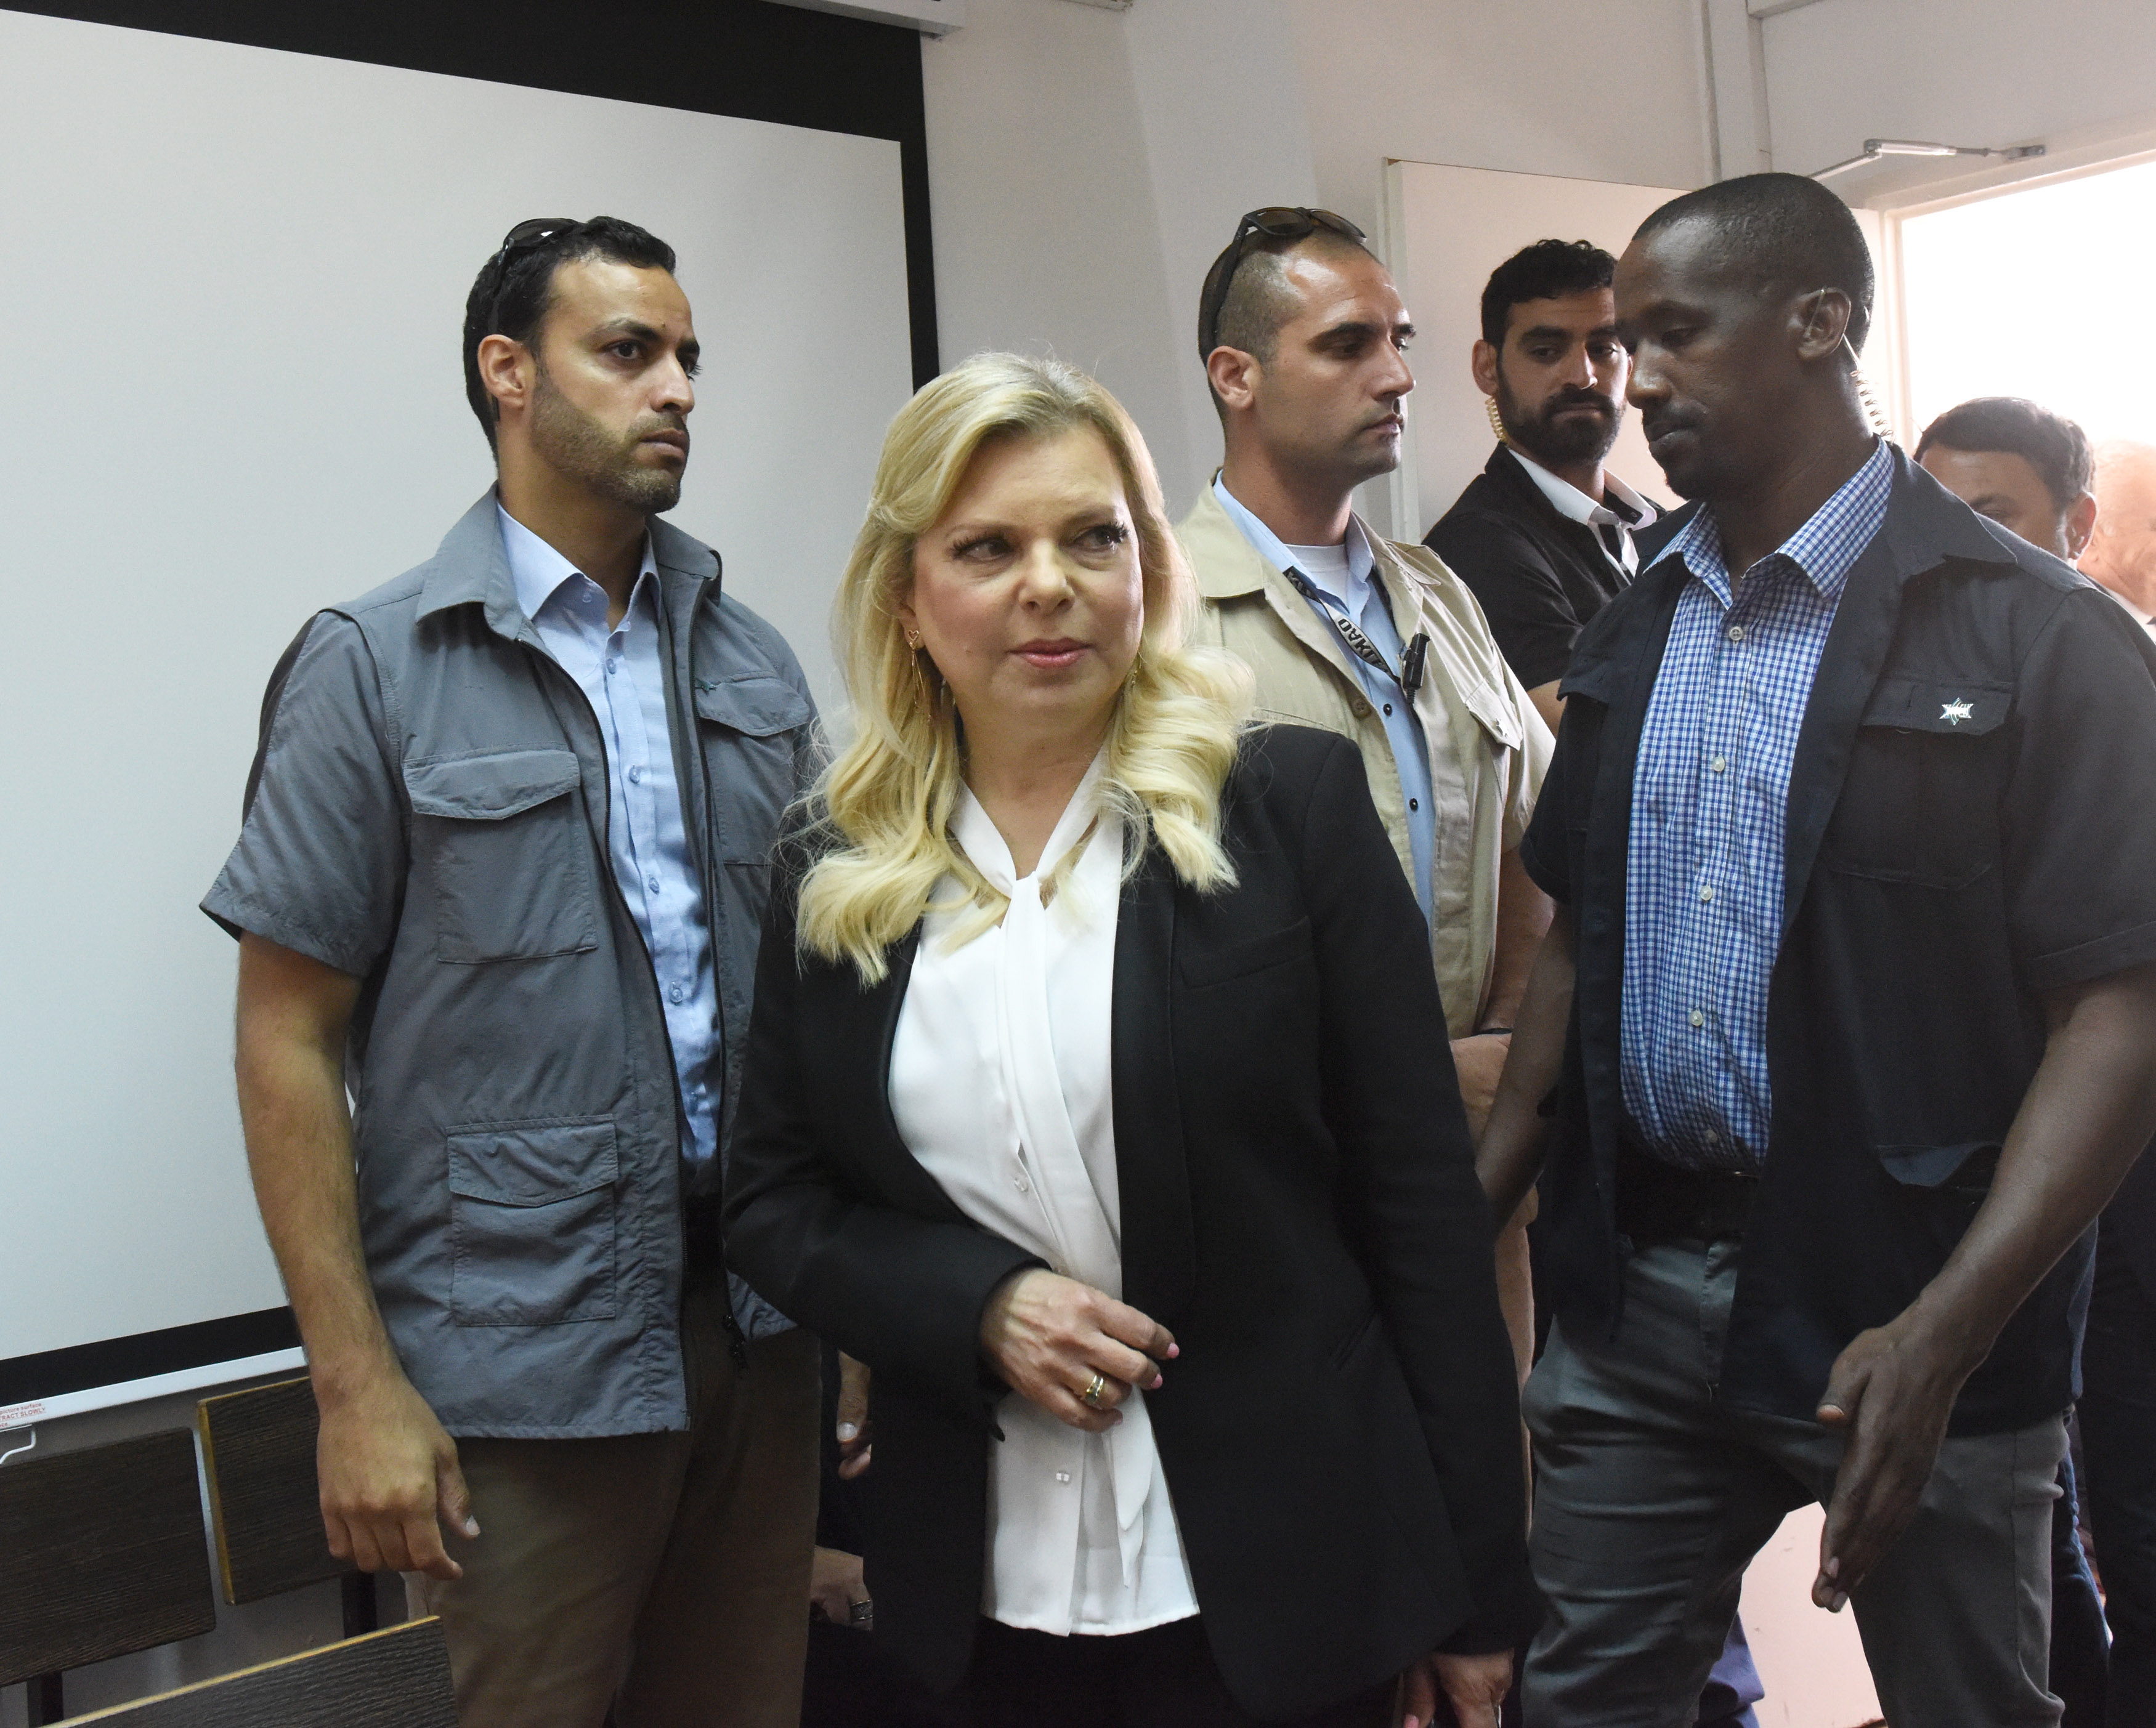 epa07651449 Sara Netanyahu (2-L), the wife of Israeli Prime Minister Benjamin Netanyahu, arrives in Jerusalem's Magistrate Court, 16 June 2019. Sara Netanyahu attended a hearing on a plea deal over the misuse of state funds for meals at the premier's residence.  EPA/DEBBIE HILL / POOL